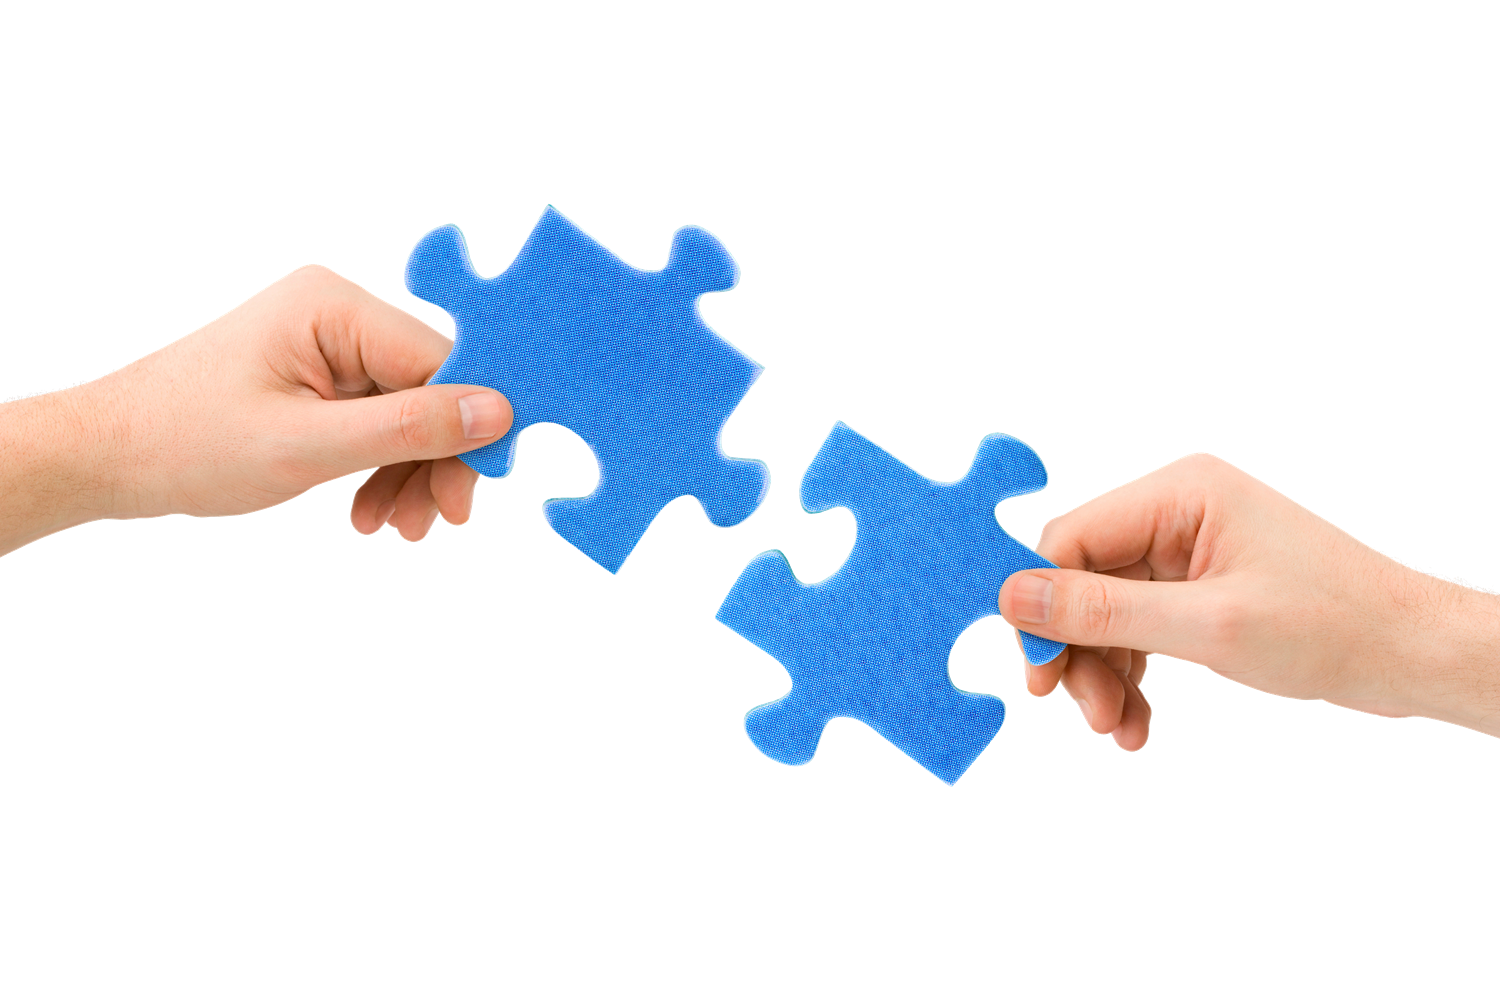 Devotional: The Puzzle of Interlocking PiecesMinistry Insights